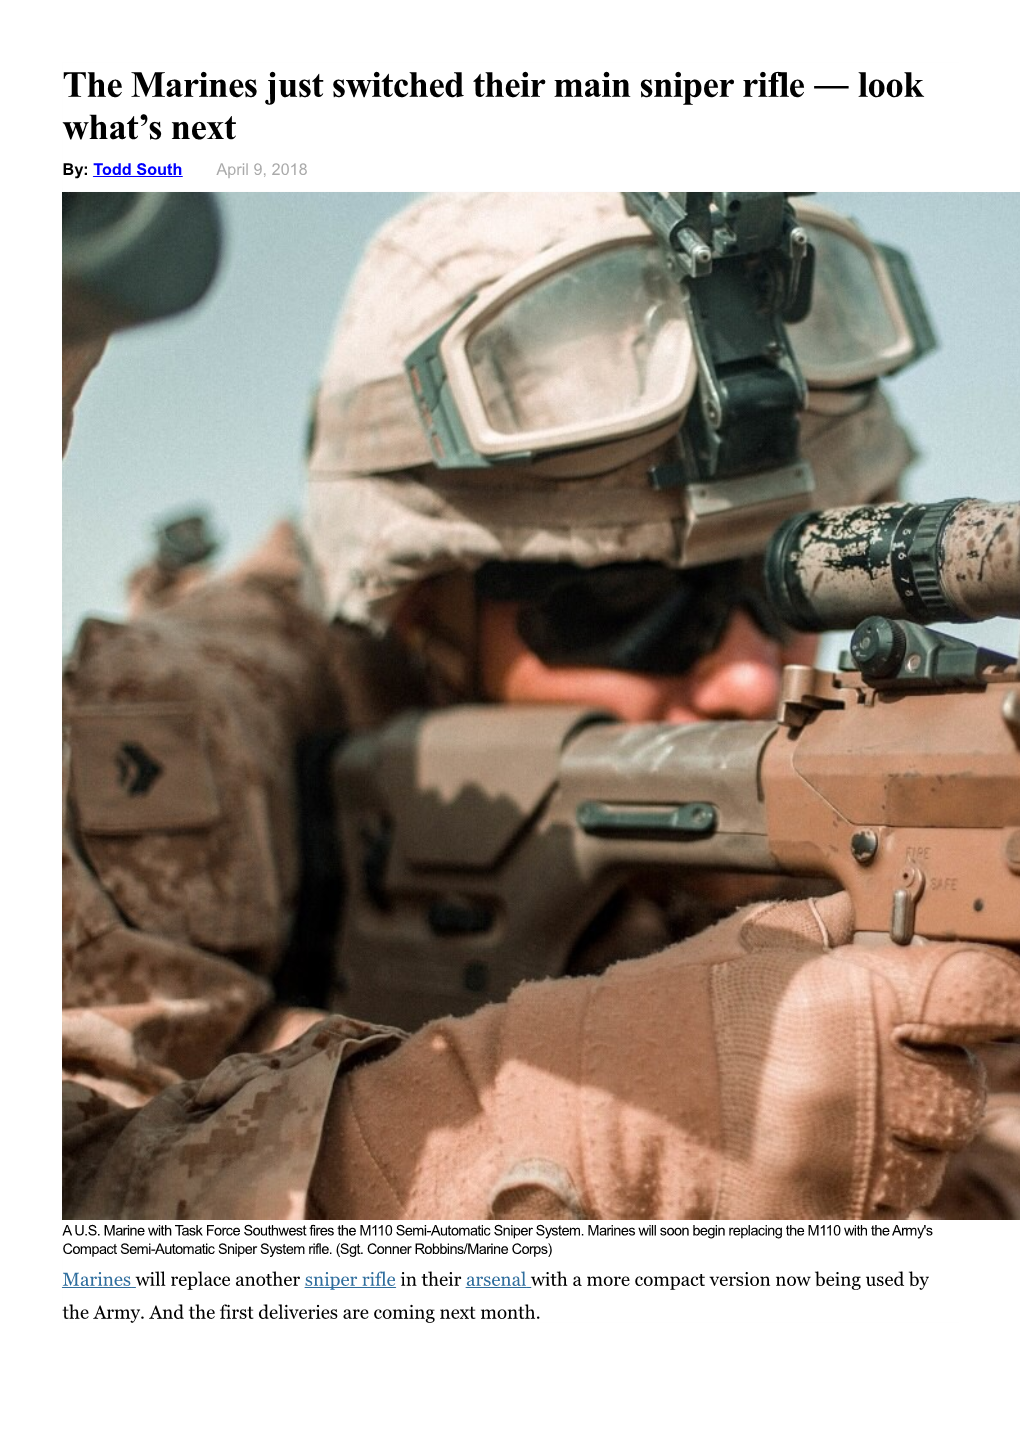 The Marines Just Switched Their Main Sniper Rifle ― Look What’S Next